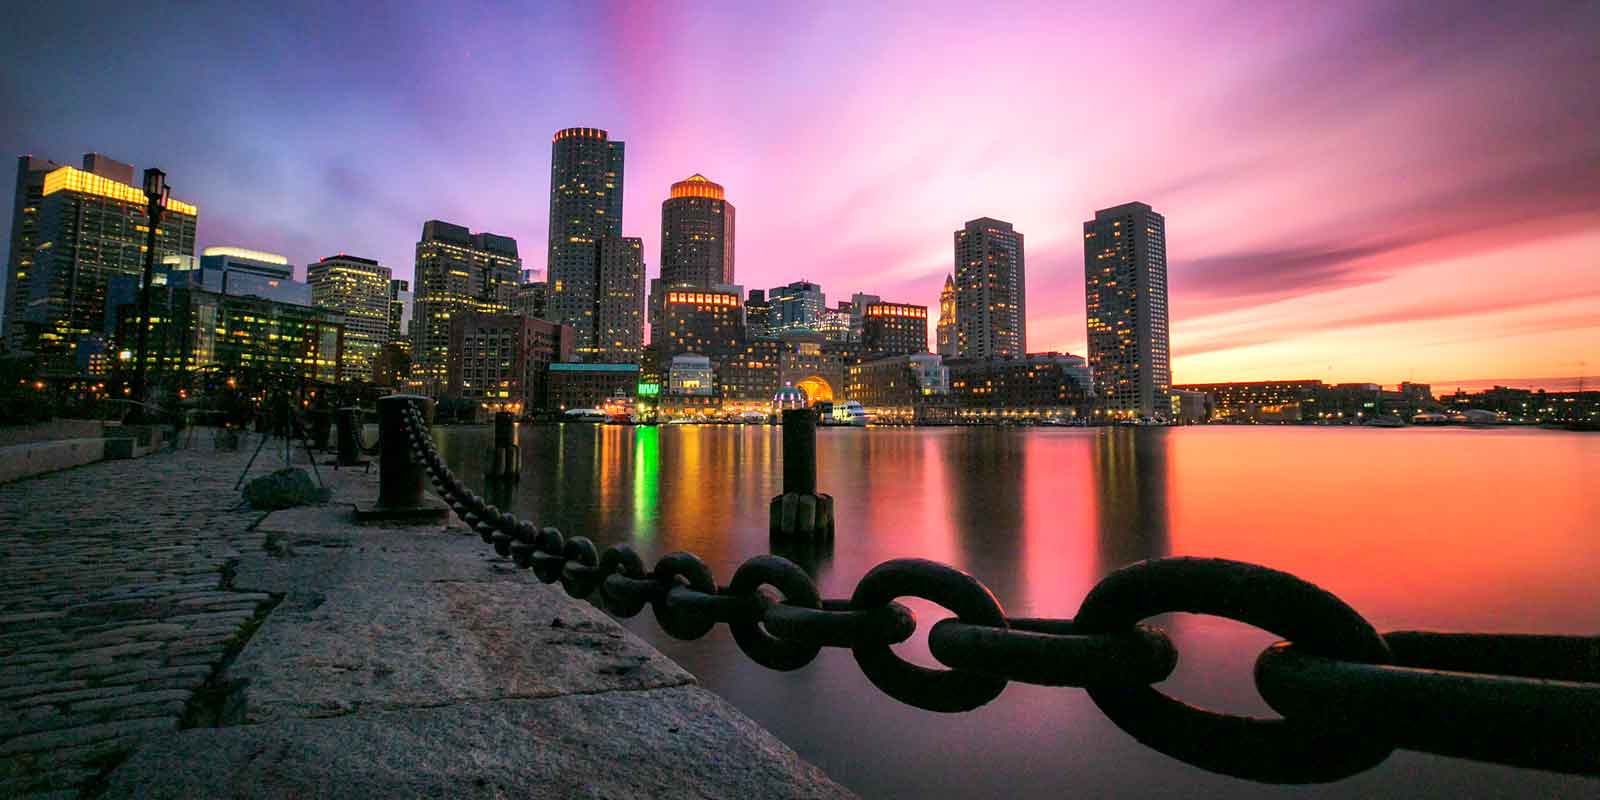 Landscape view of the Boston waterfront during sunrise with blue, purple, pink, yellow and orange skies with the cityscape in the background.